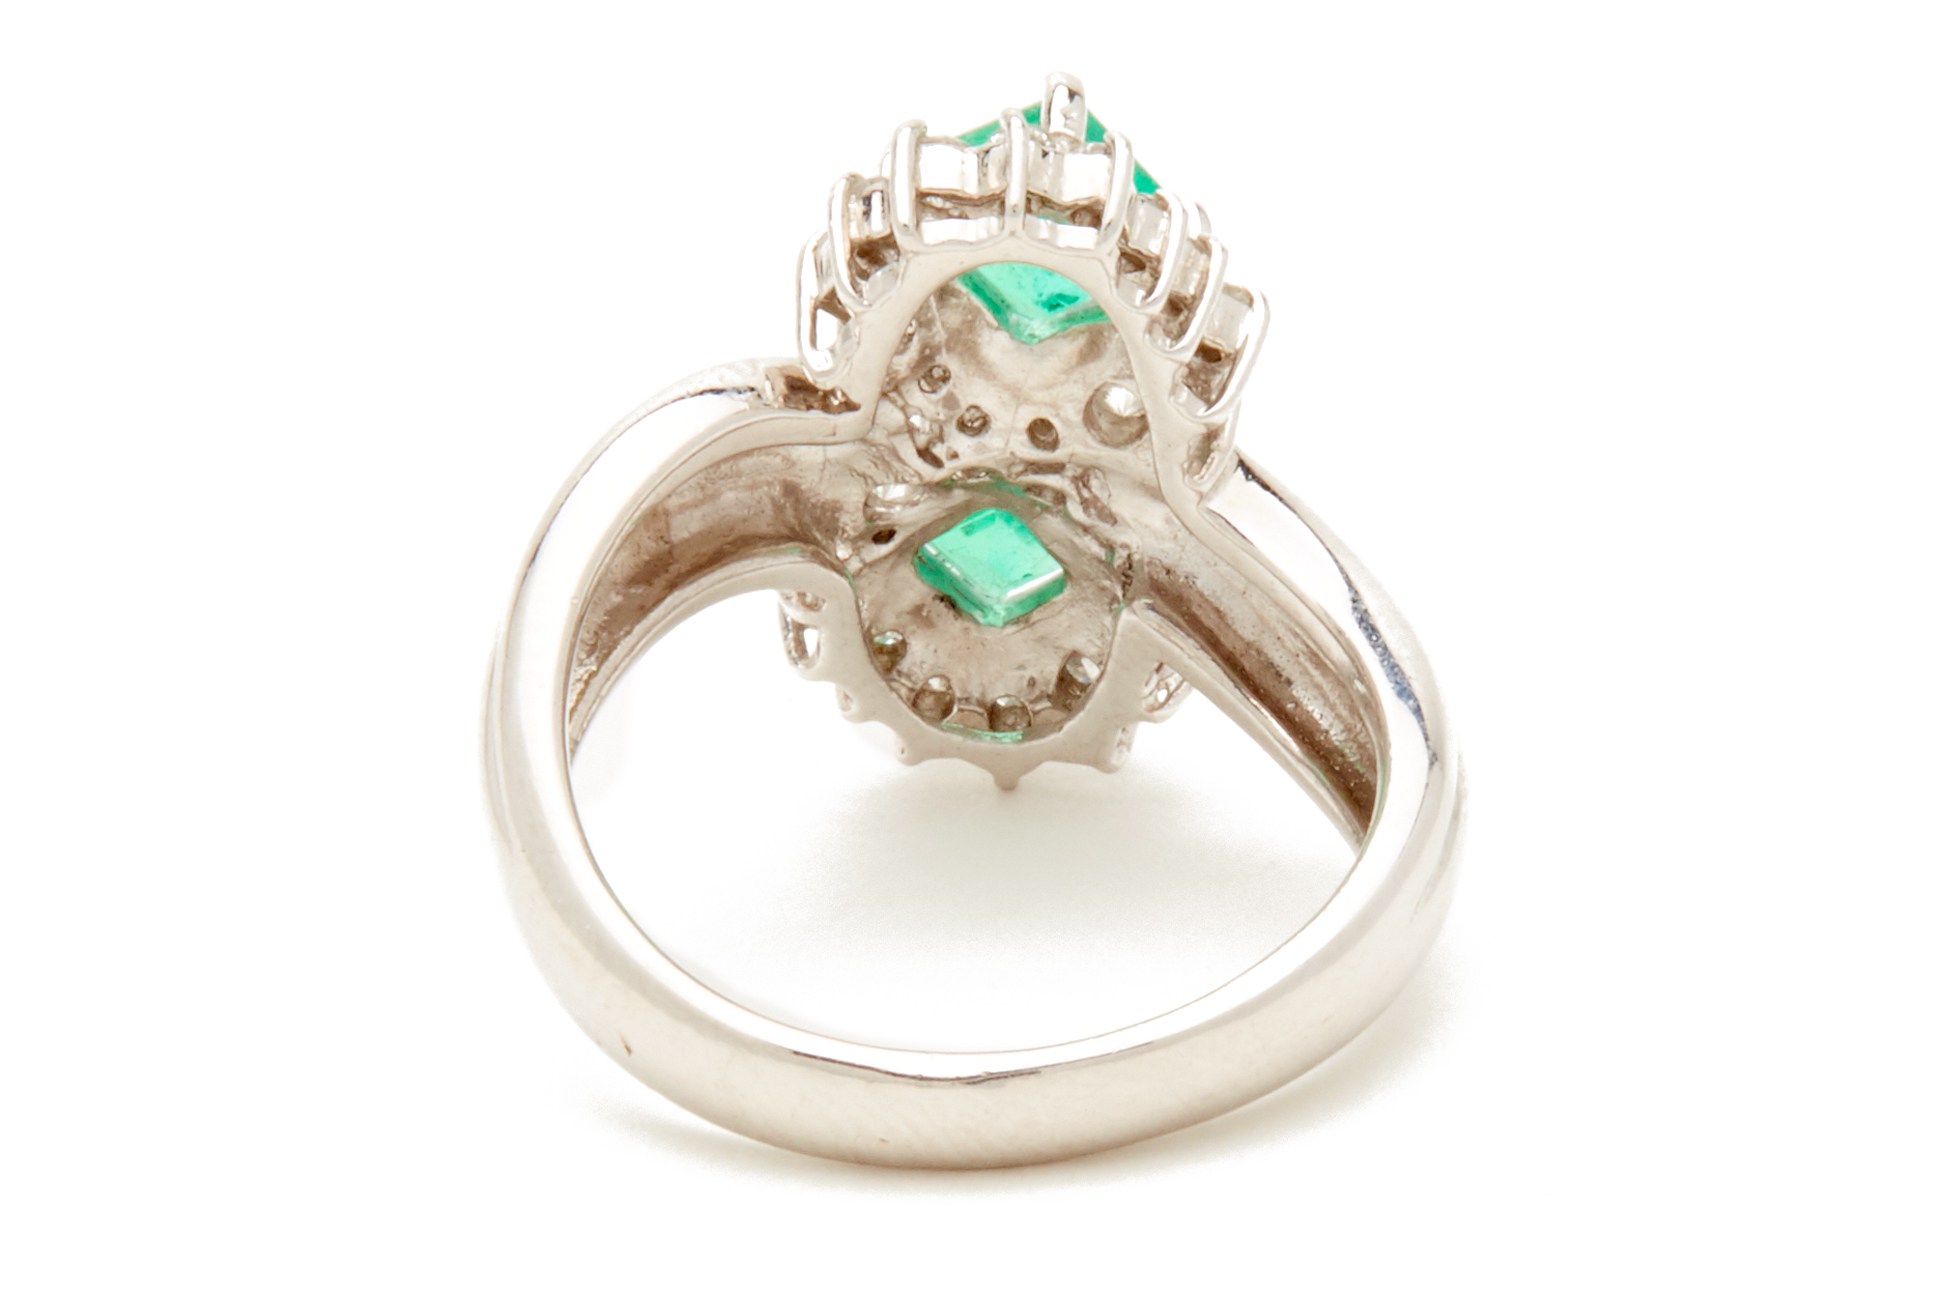 A PLATINUM, EMERALD AND DIAMOND RING - Image 4 of 4